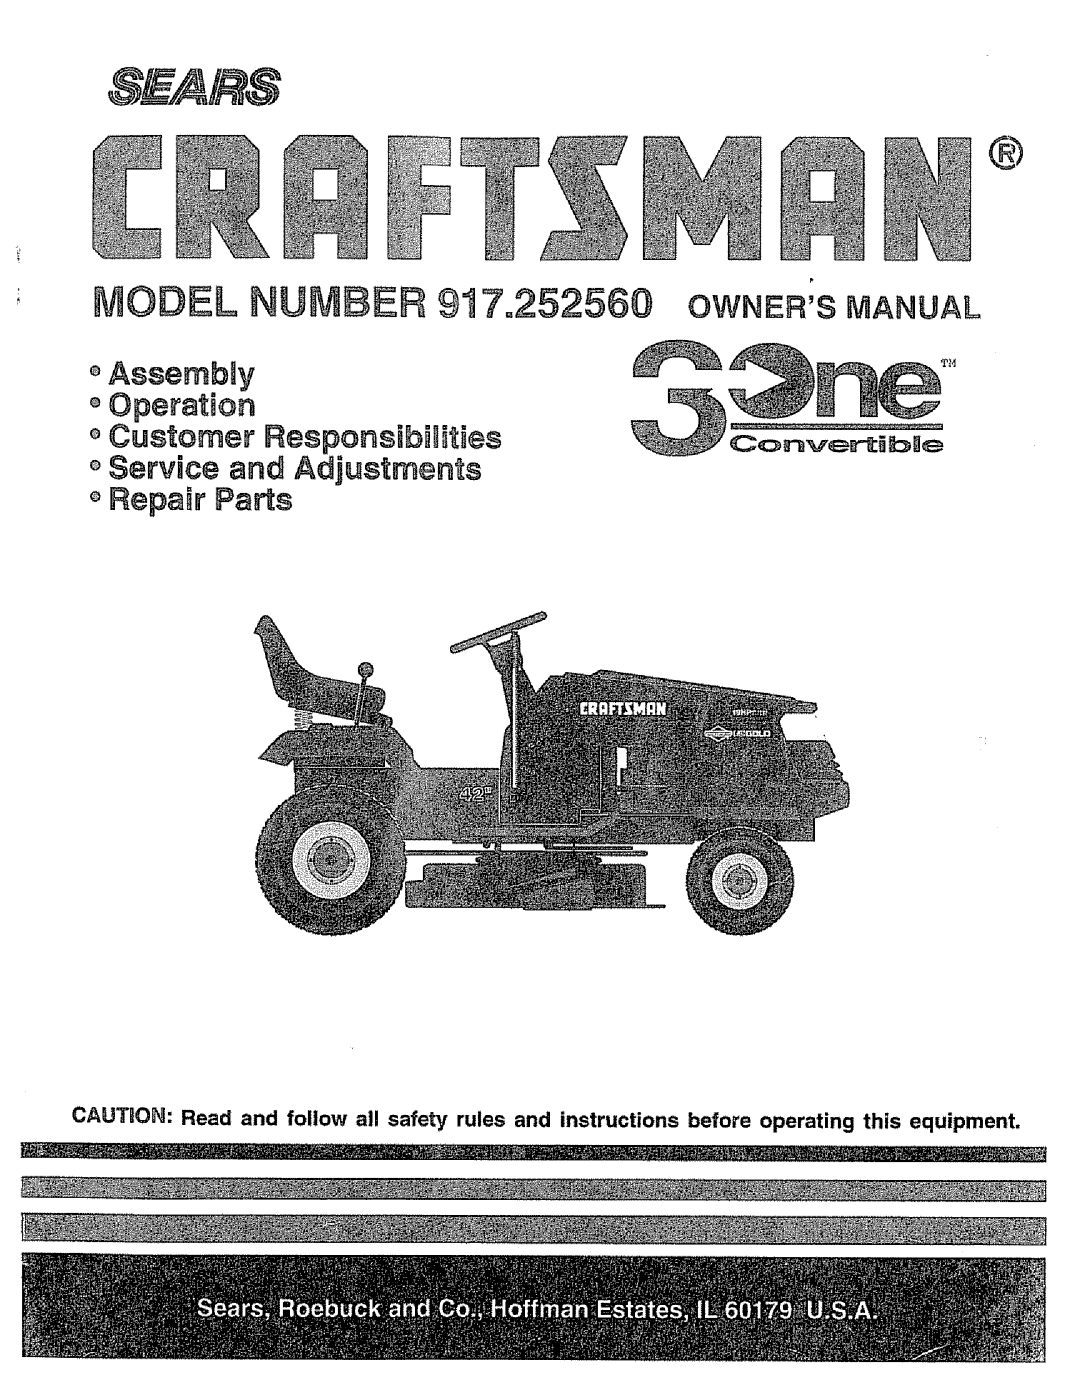 Craftsman 917.252560 manual Model, oAssembly o Operation, o Customer ResponsibilitBes, 917=252560 OWNERS MANUAL 